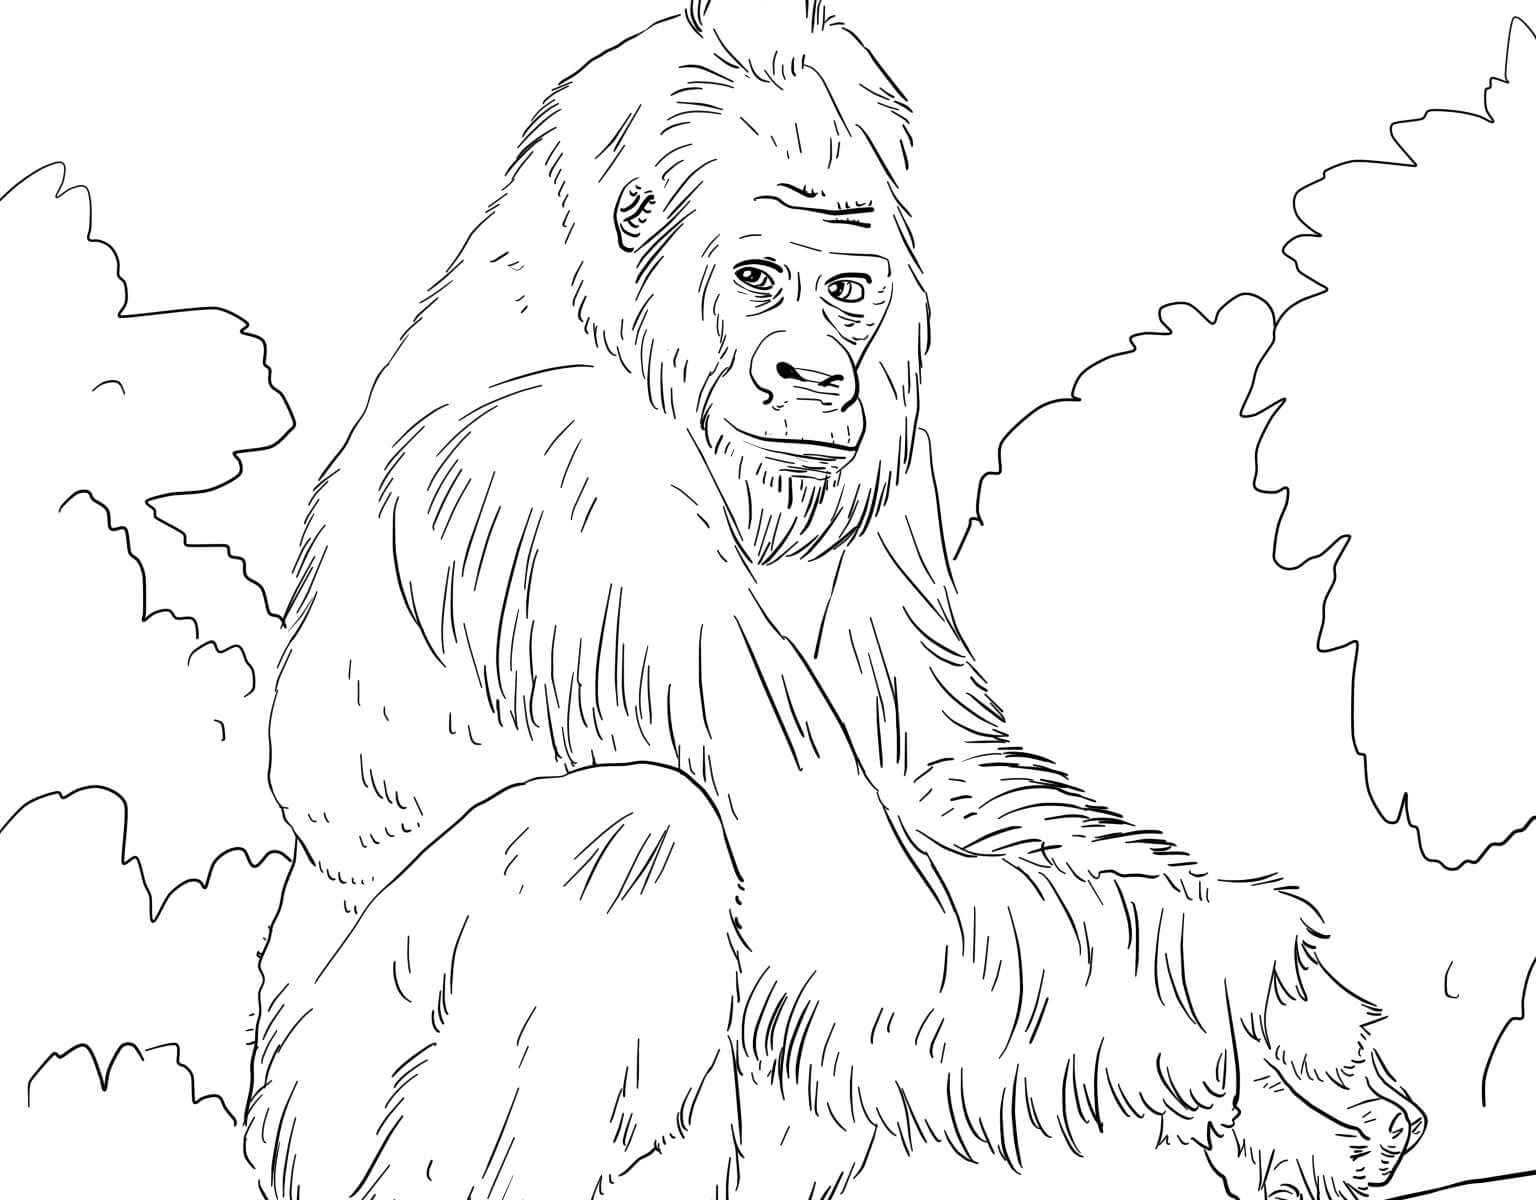 Gorilla Coloring Pages at GetColorings.com | Free ...